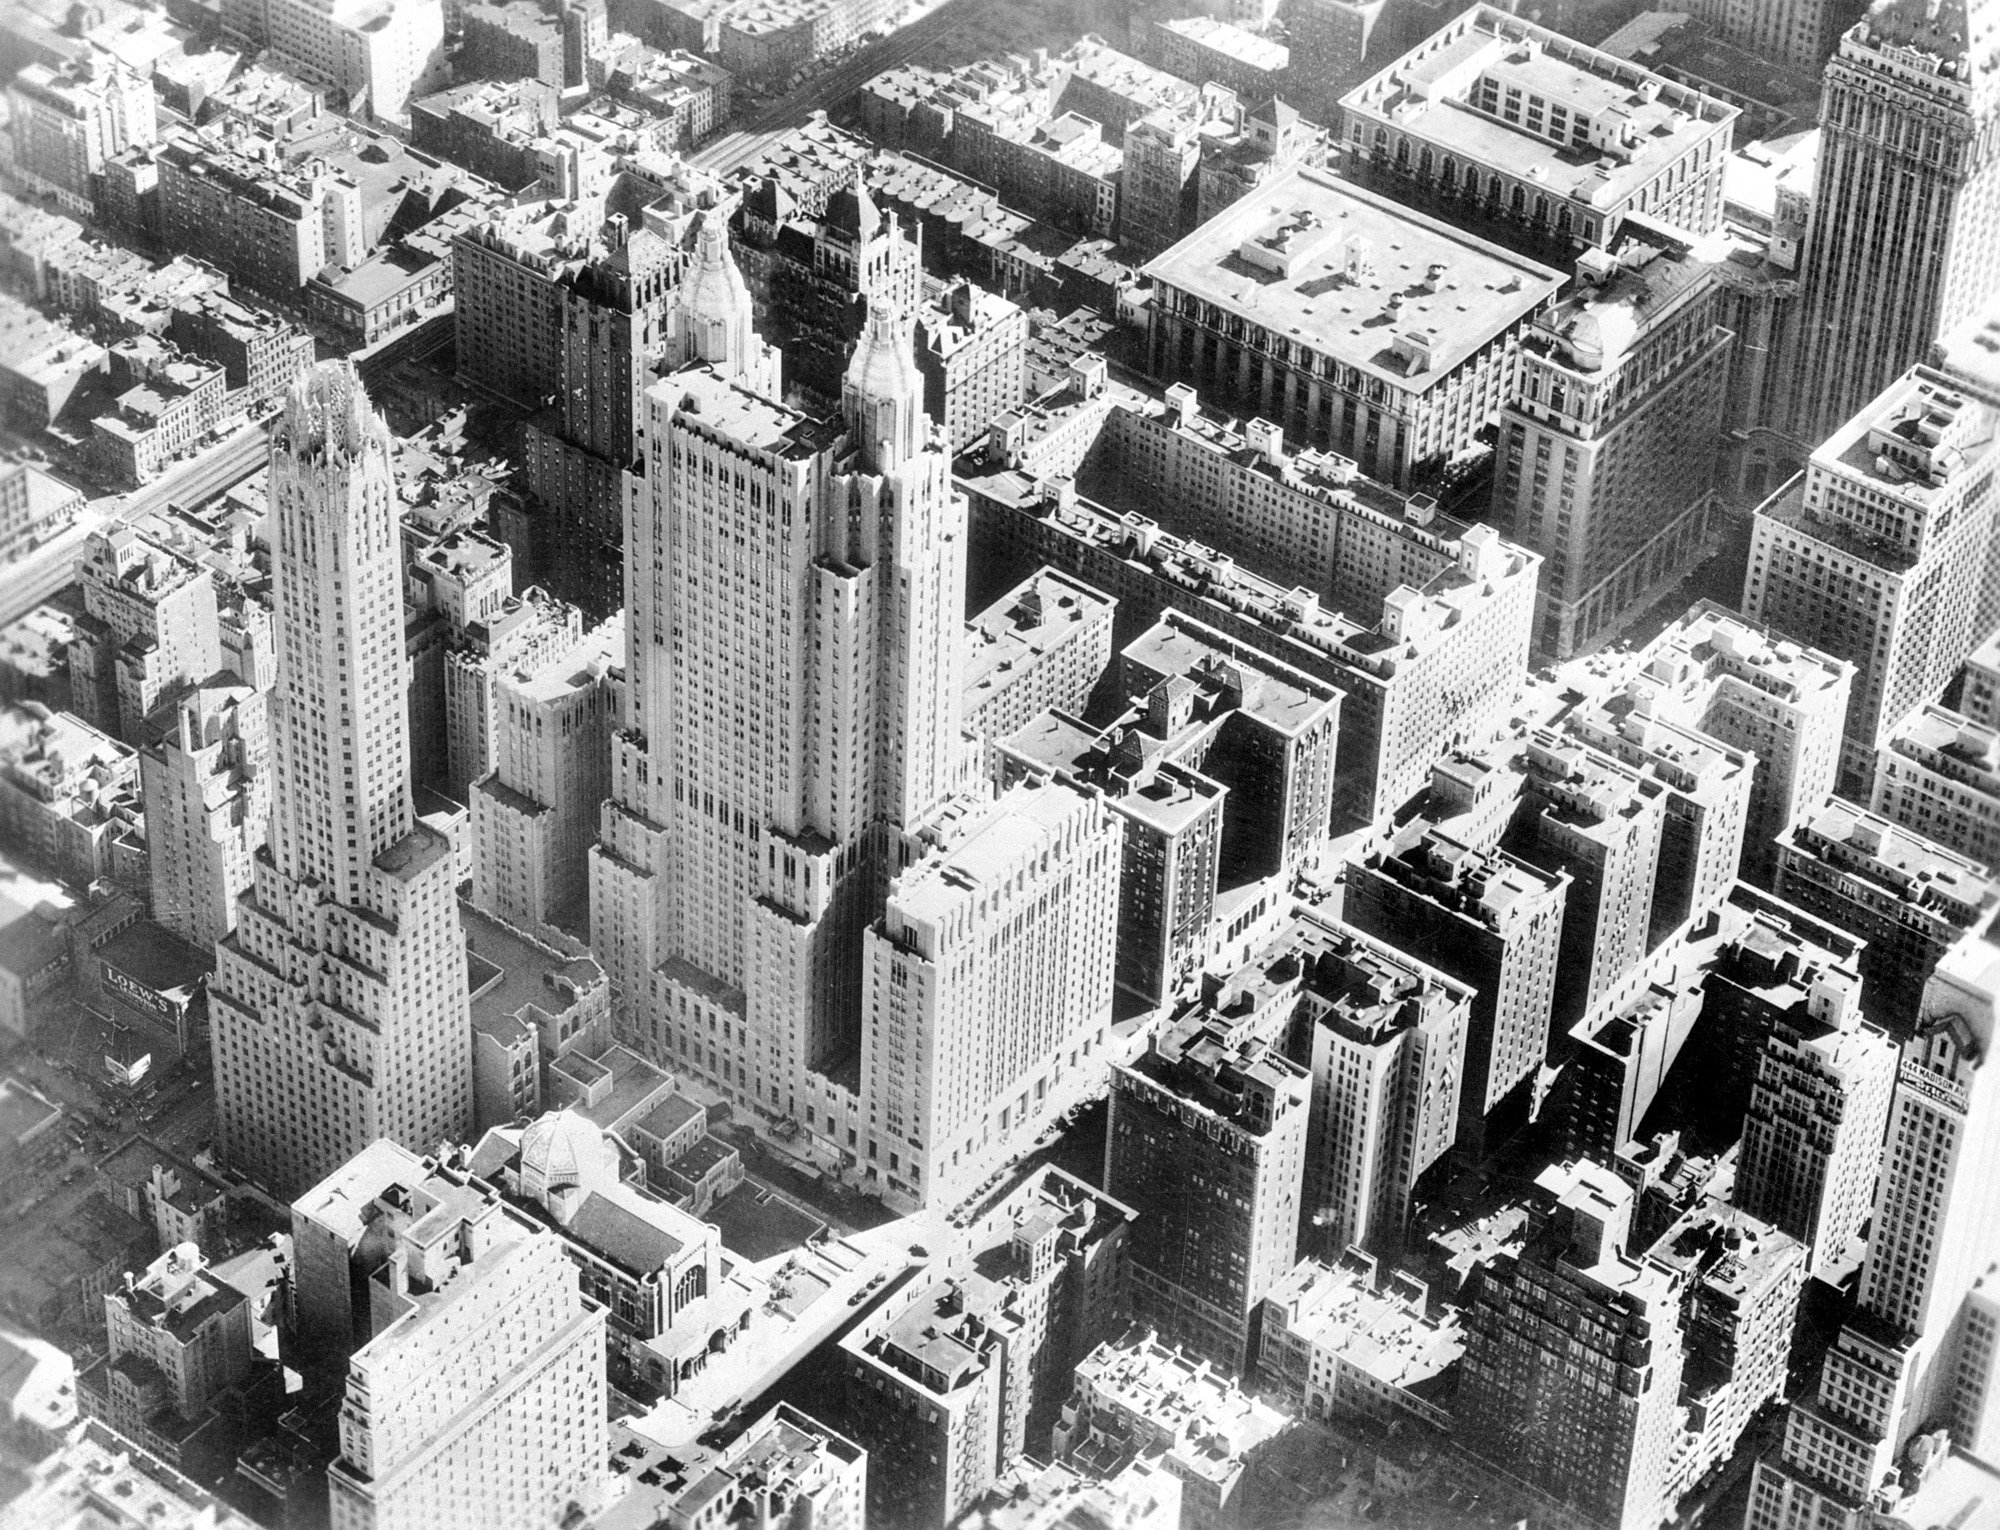 1931 Aerial View of Waldorf Astoria Site in New York City